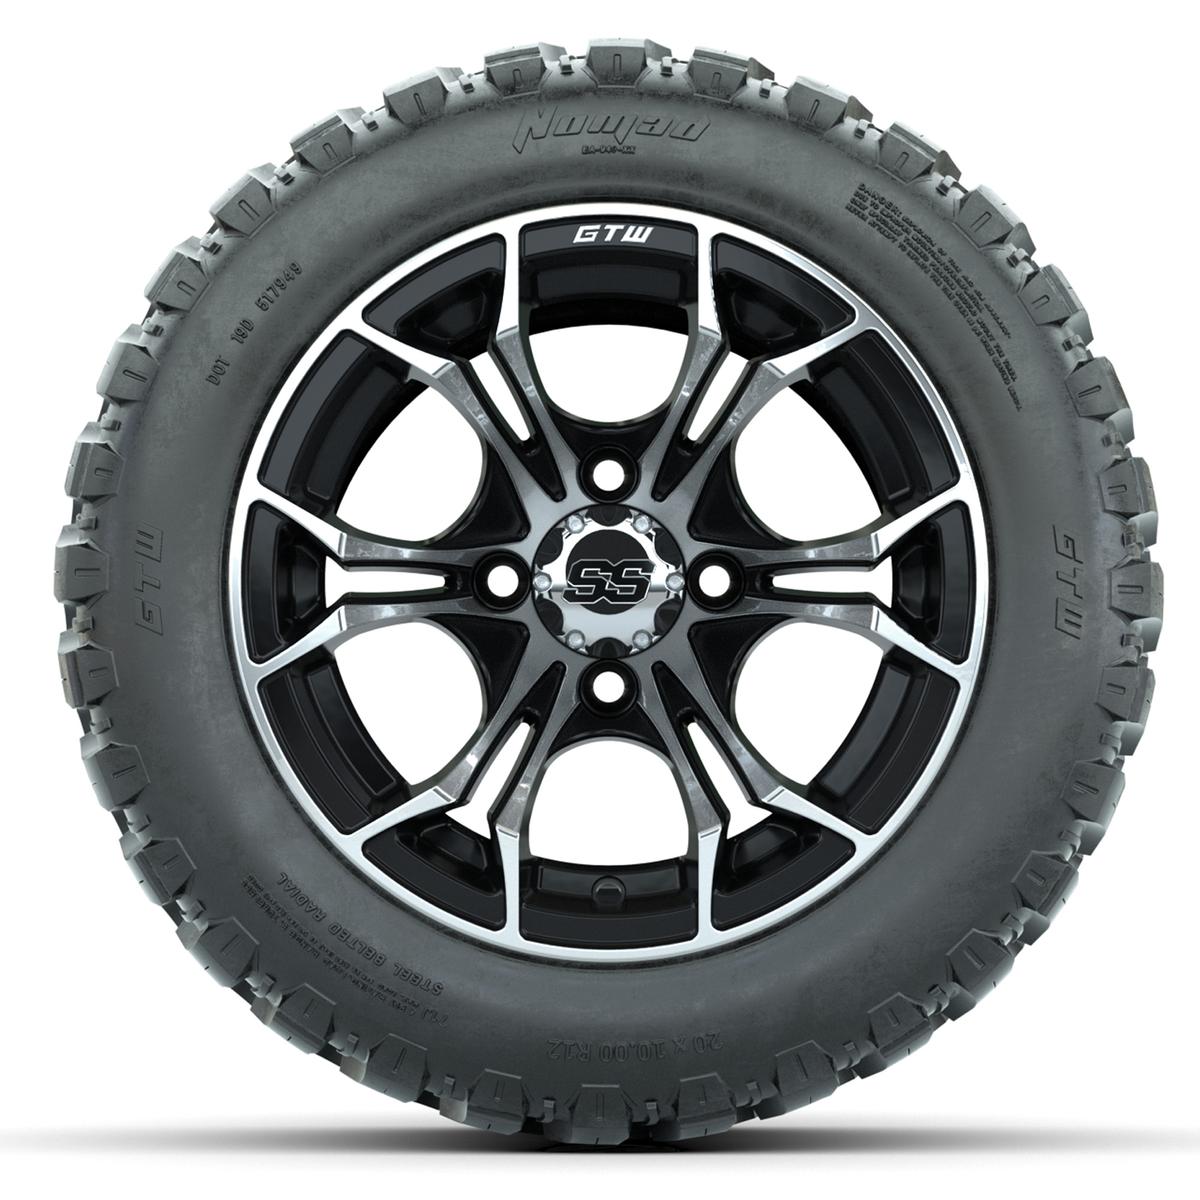 GTW Spyder Machined/Black 12 in Wheels with 20x10-R12 GTW Nomad All-Terrain Tires – Full Set